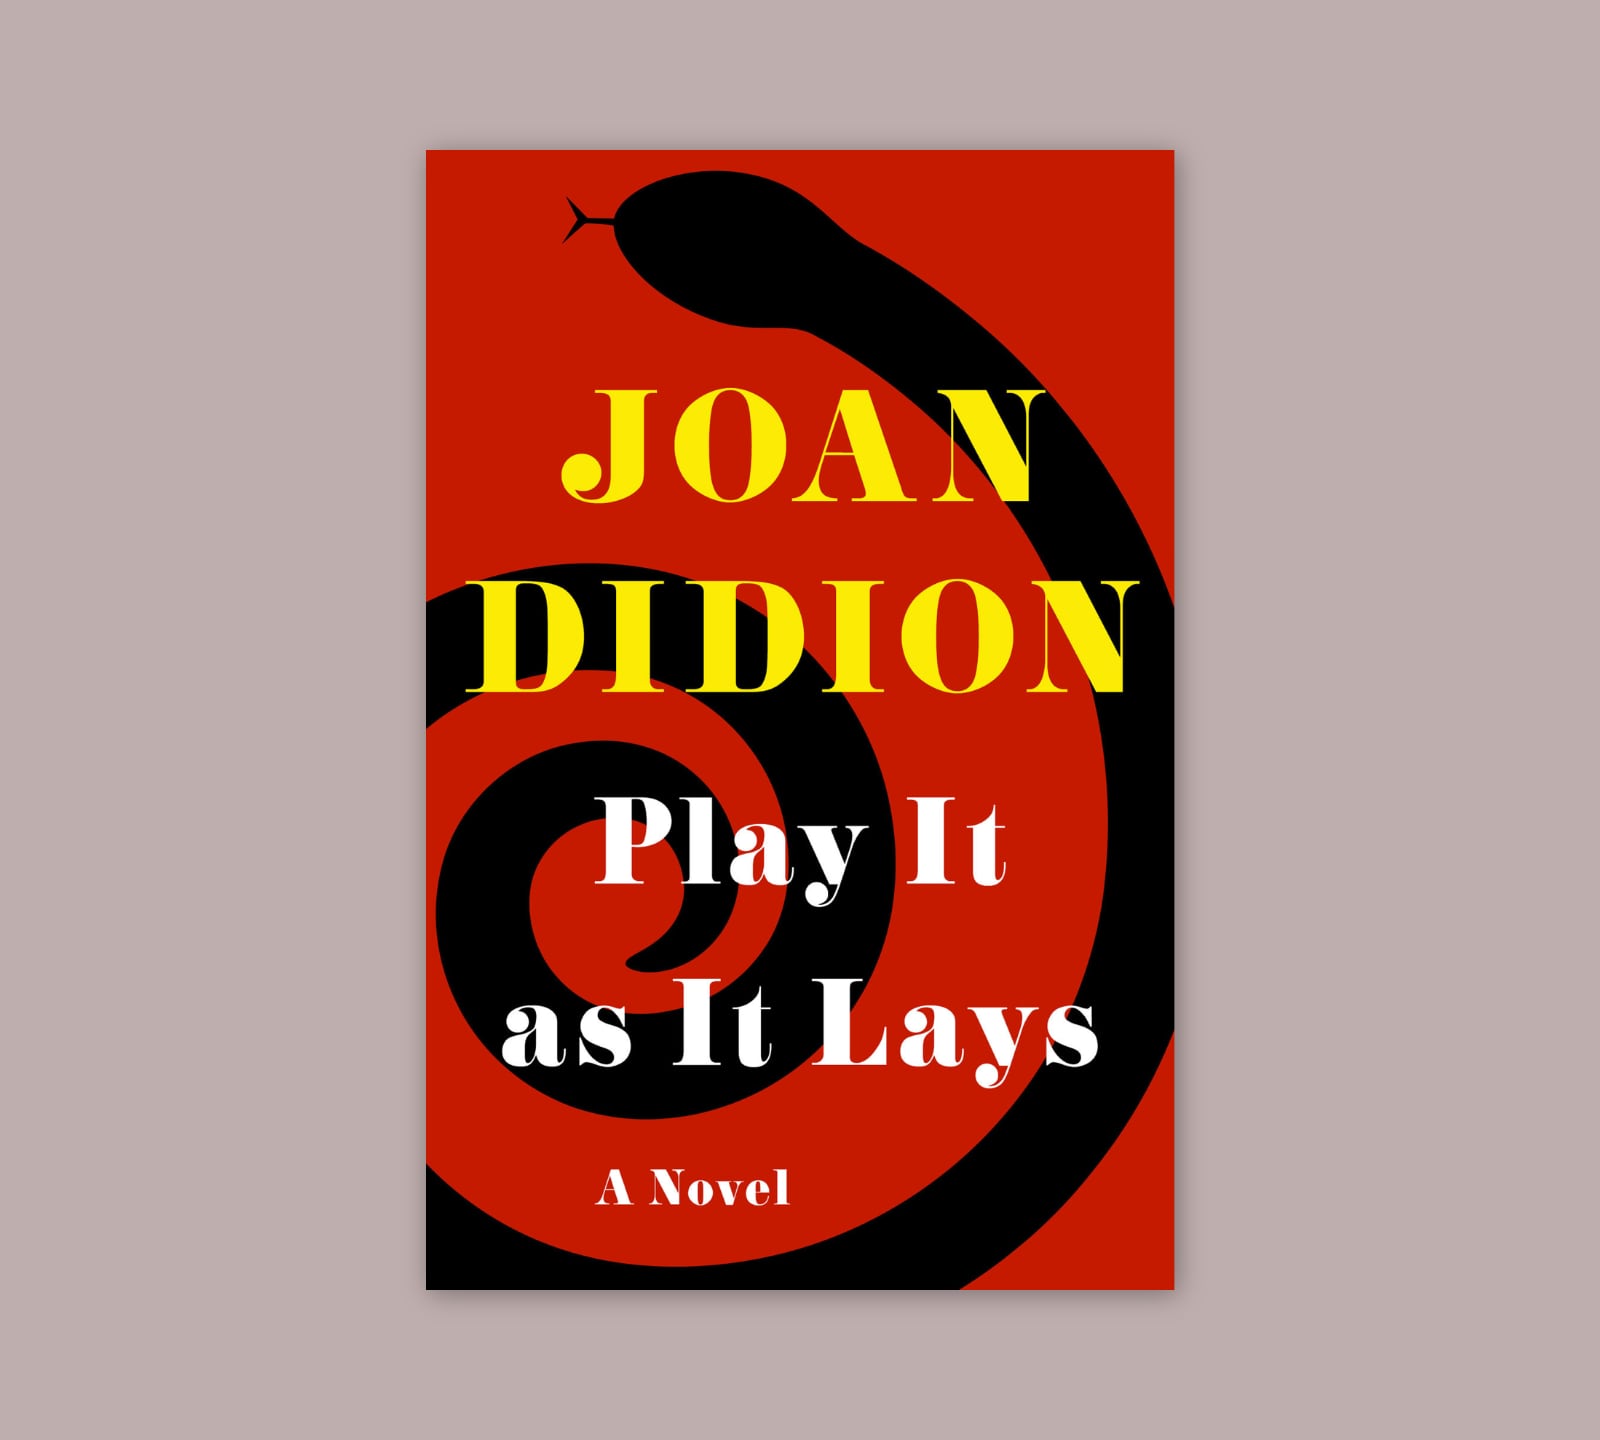 "Play It as It Lays by Joan Didion"